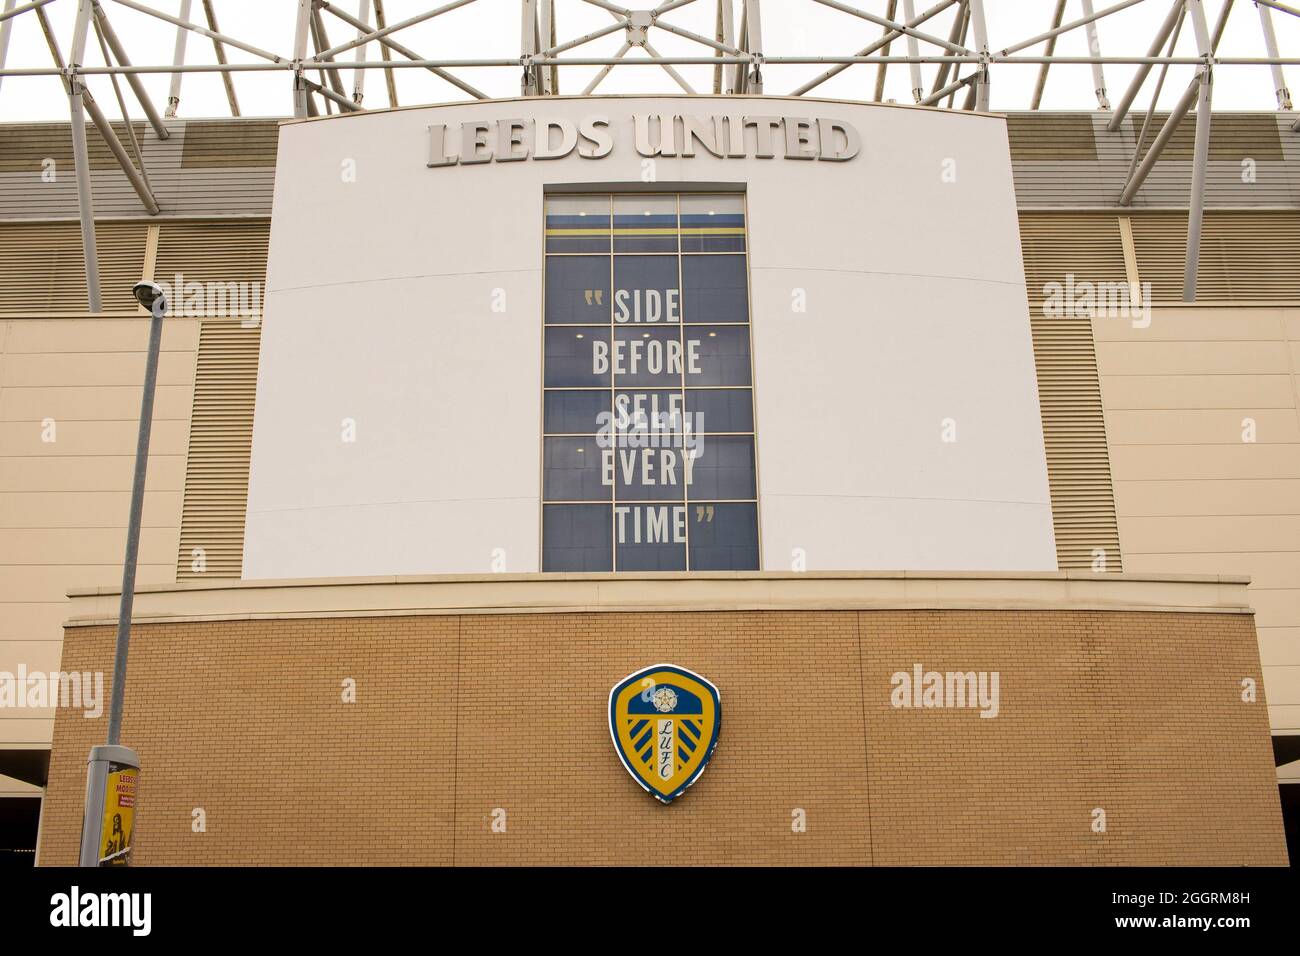 The East Stand façade at Elland Road on the 22nd August 2021. Credit: Lewis Mitchell Stock Photo